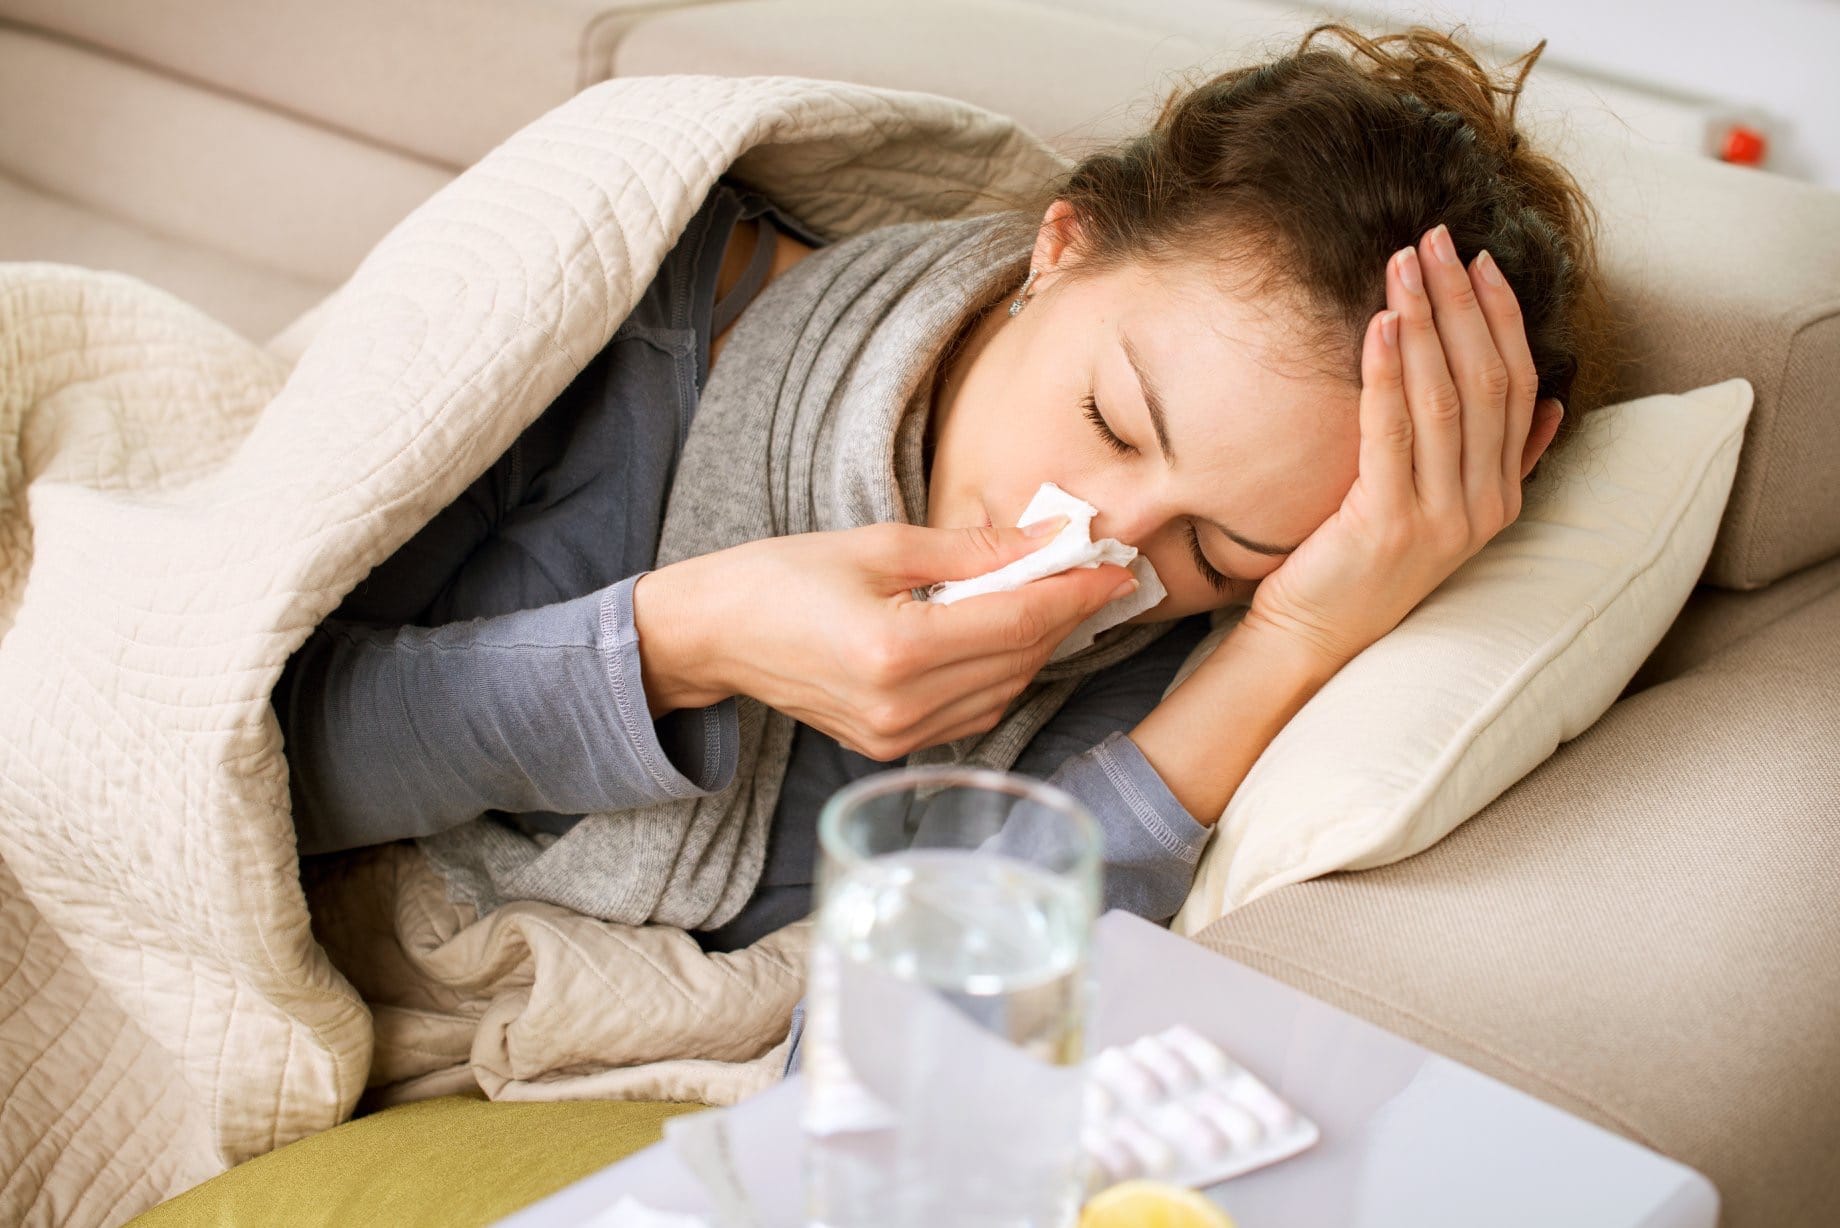 Doc Talk: Top Five Questions about the Flu